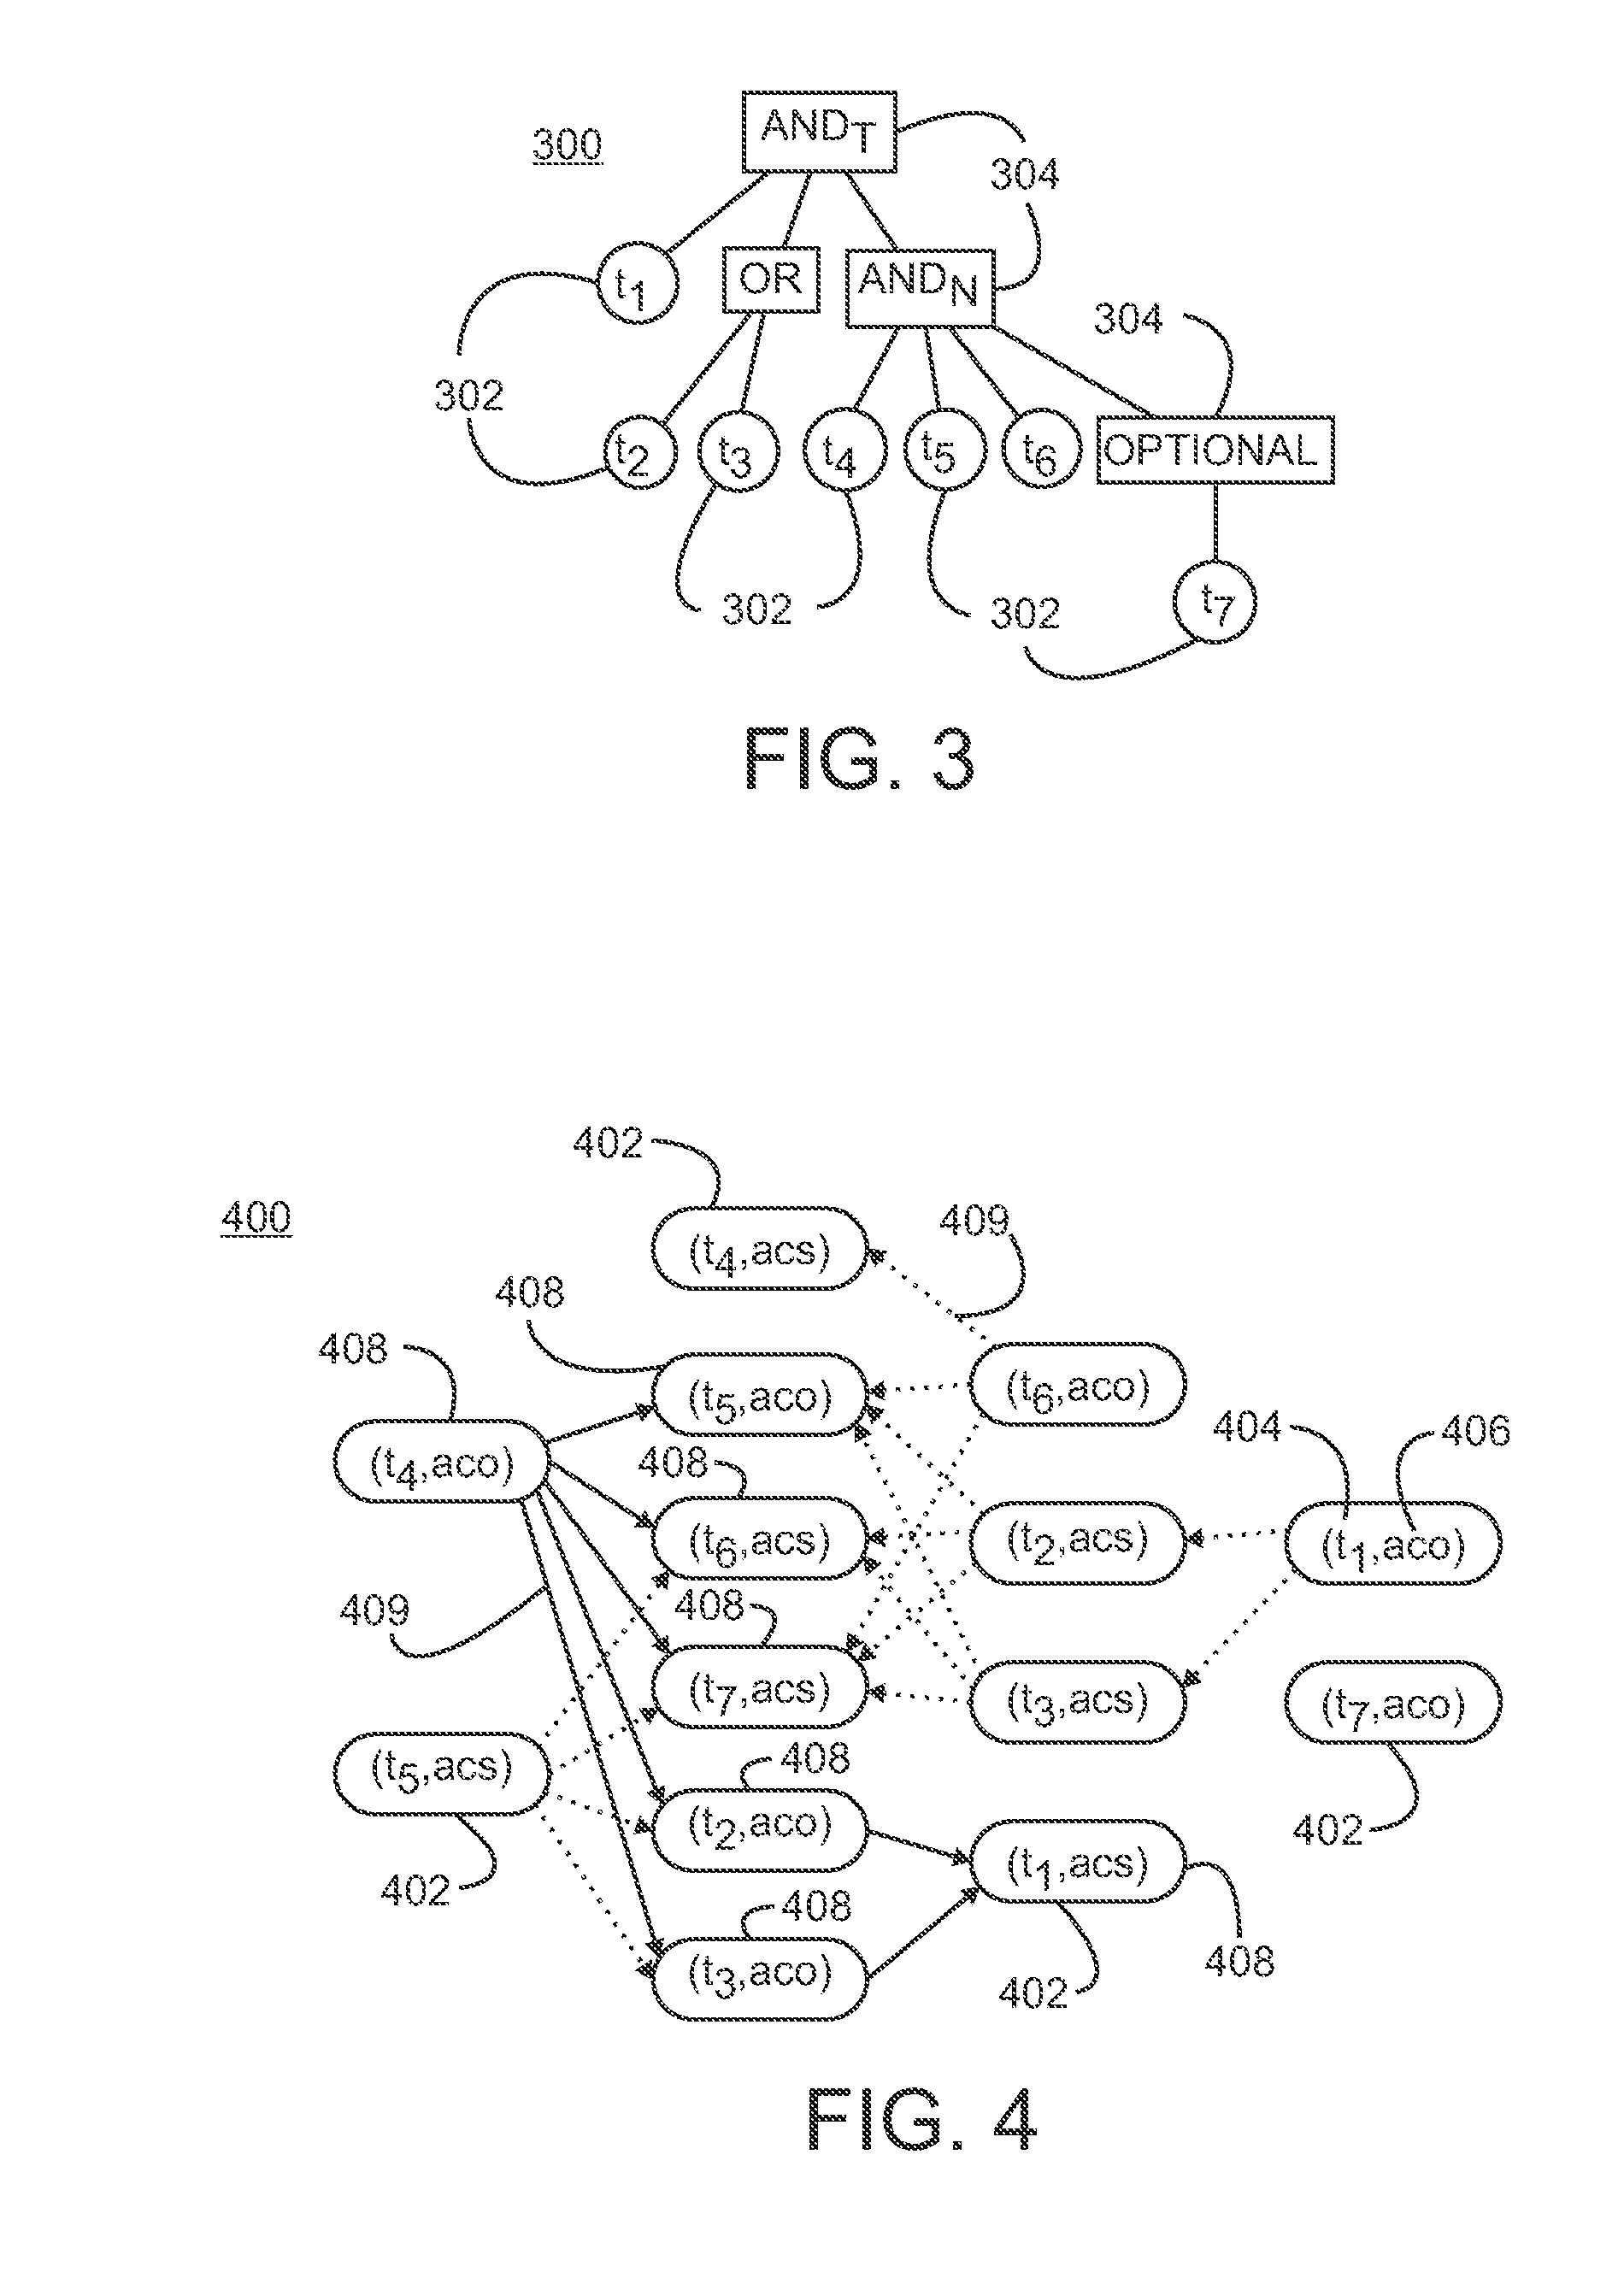 Method and Apparatus for Optimizing the Evaluation of Semantic Web Queries